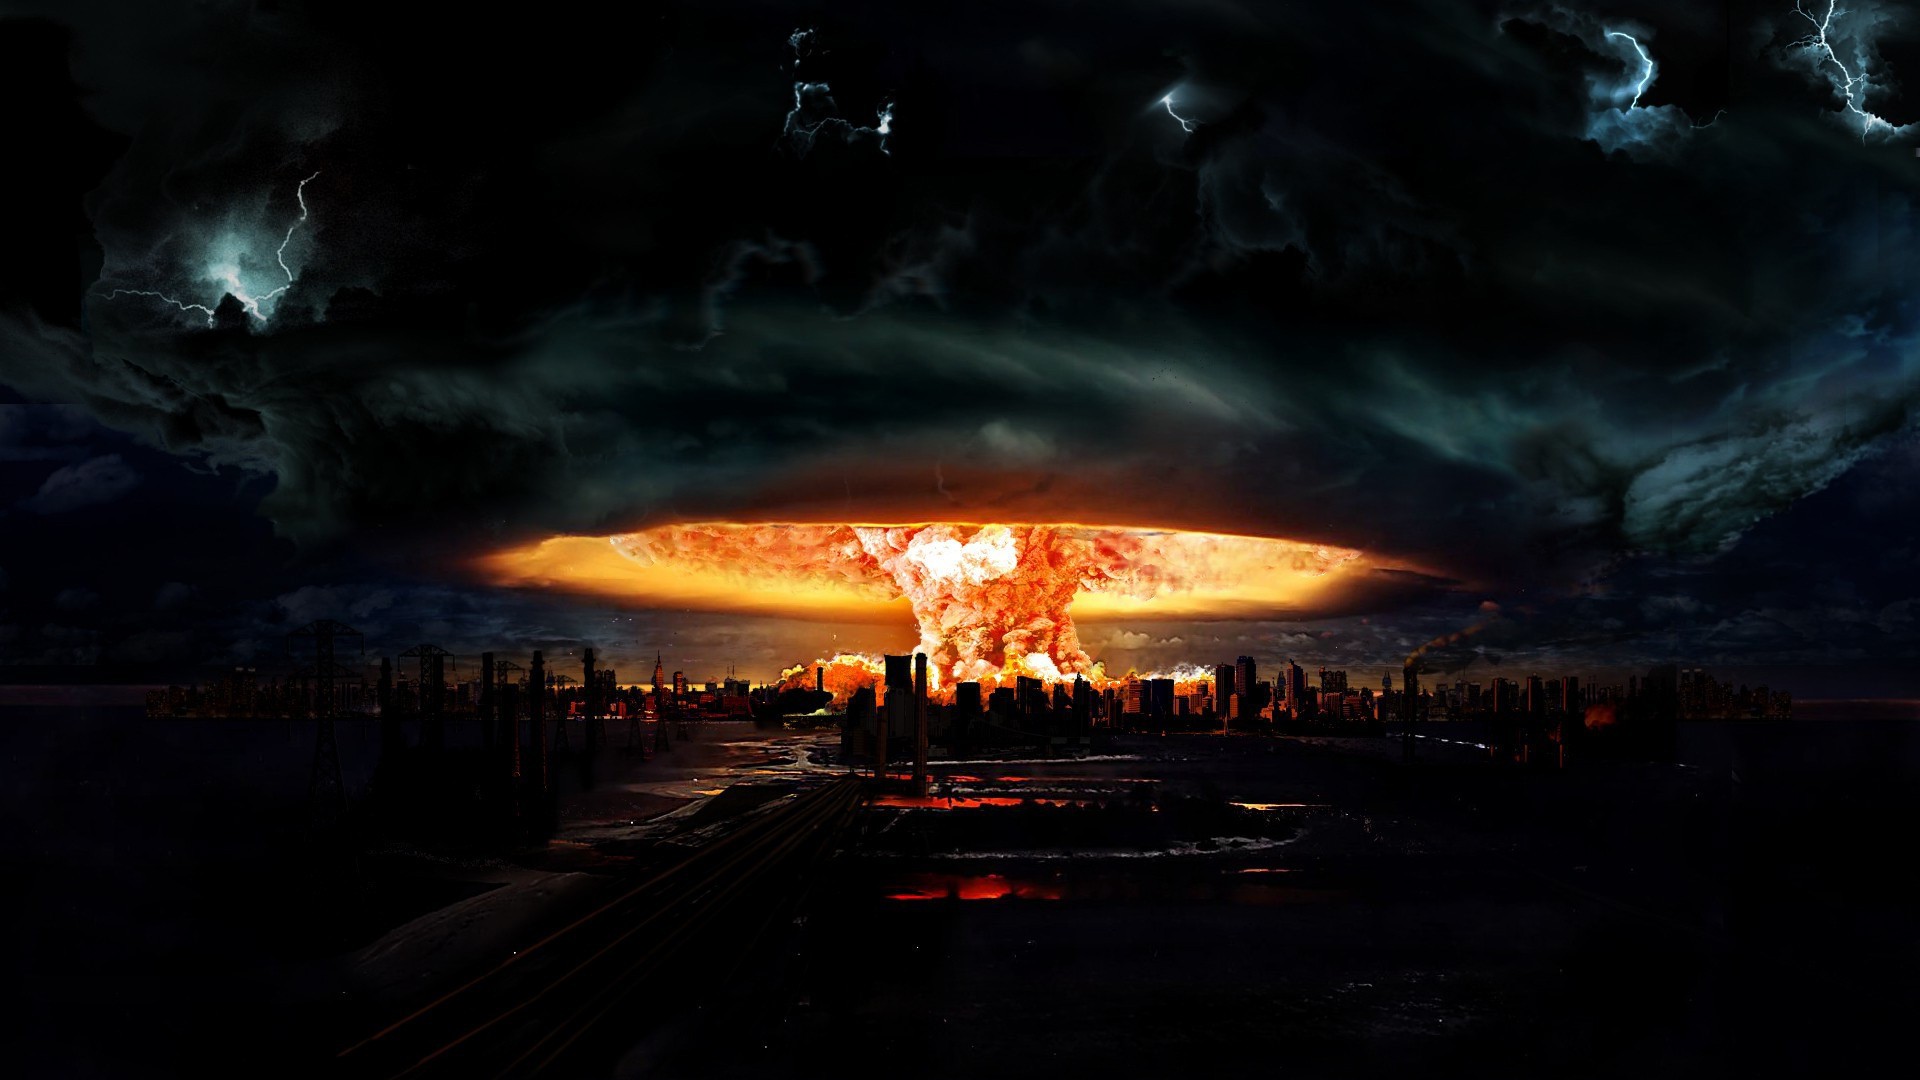 General 1920x1080 nuclear explosion cityscape city mushroom clouds fire apocalyptic lights atomic bomb digital art space eruption